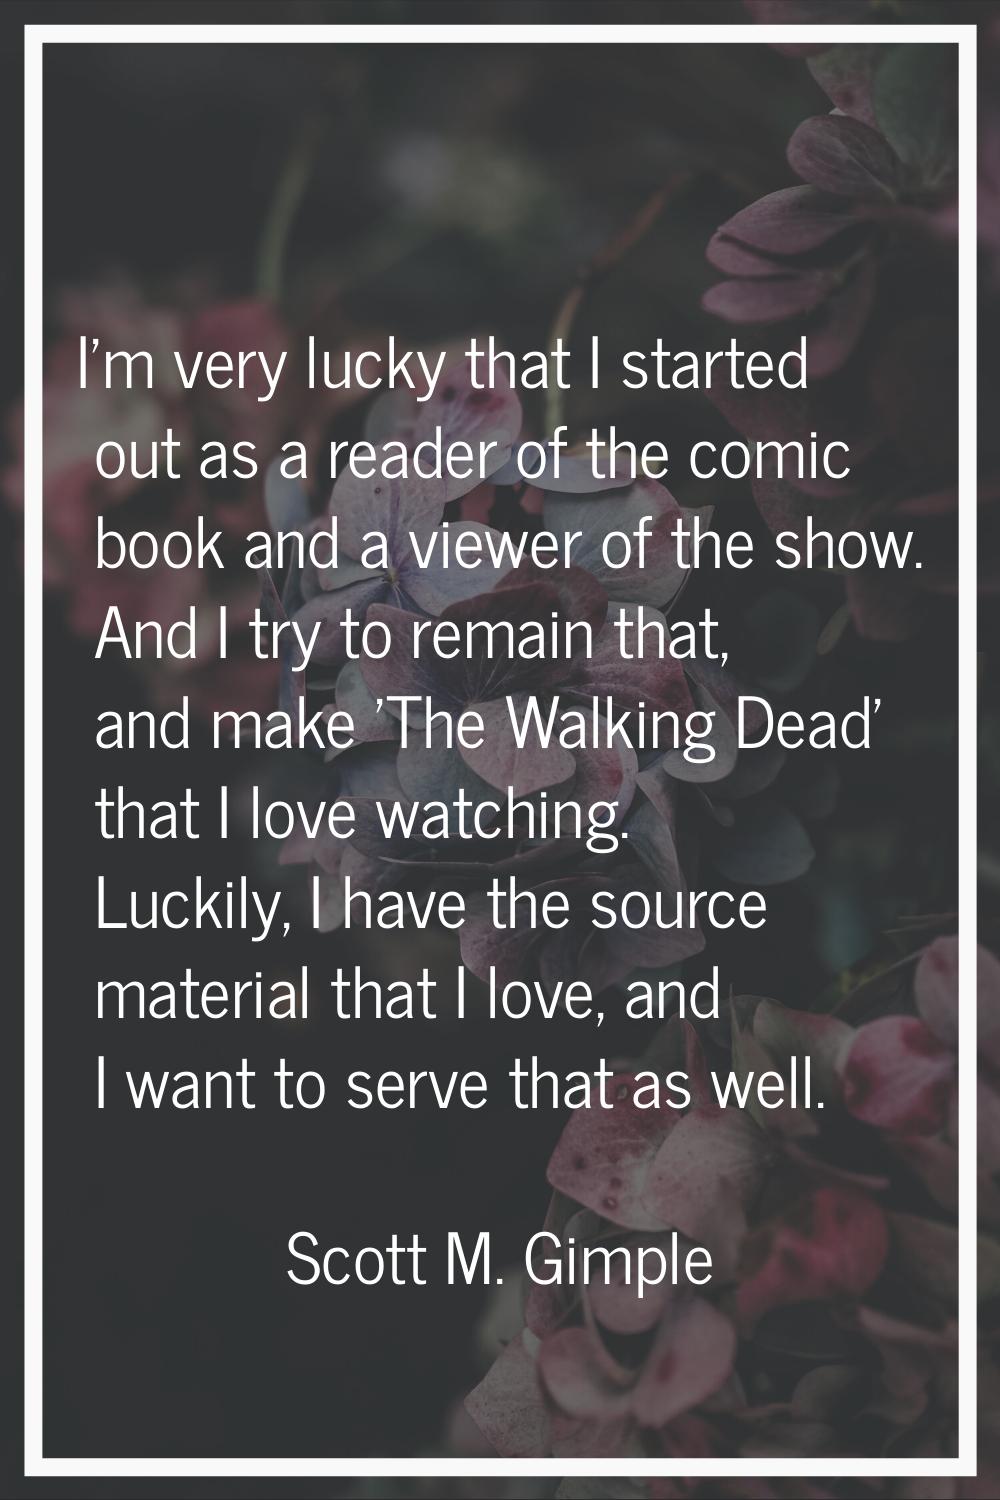 I'm very lucky that I started out as a reader of the comic book and a viewer of the show. And I try